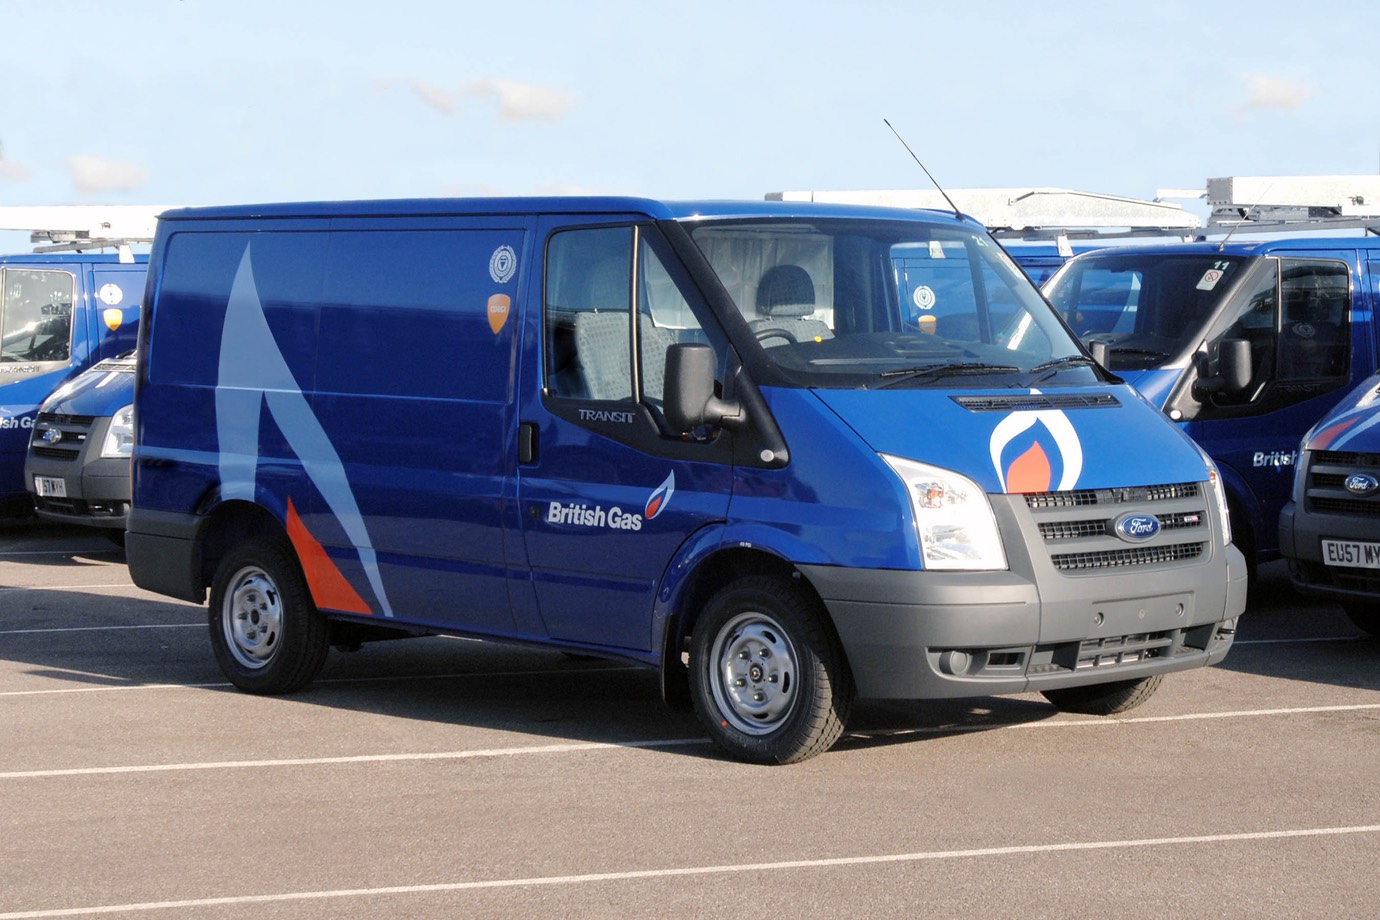 Ford Transit vans carry the blue livery 